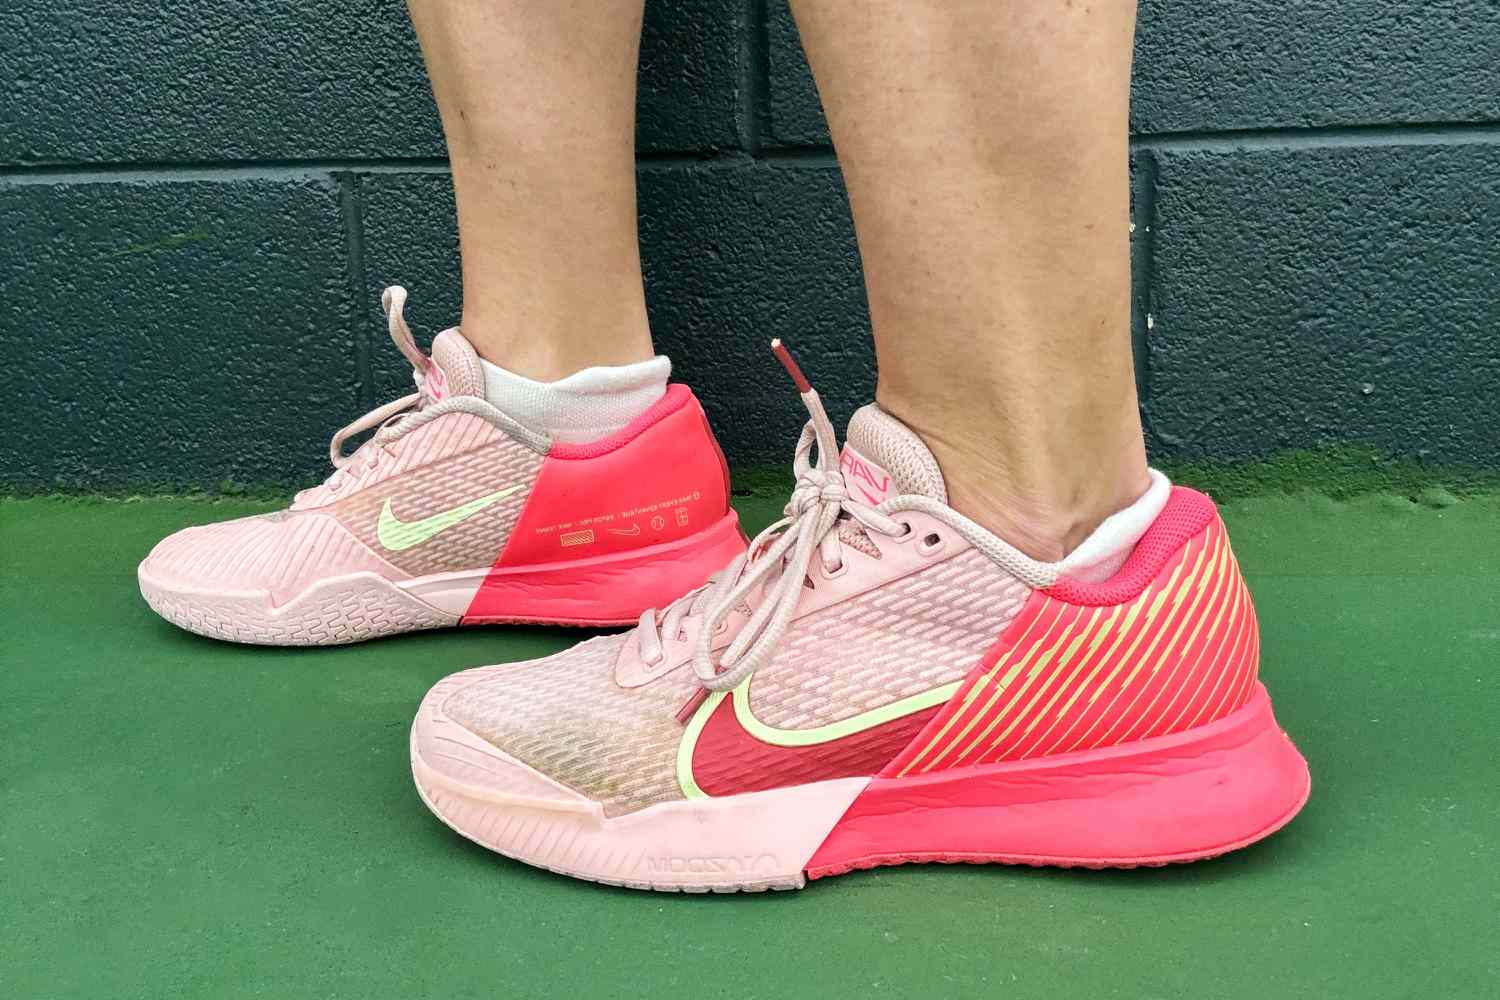 A person wears the NikeCourt Air Zoom Vapor Pro 2 shoes on a pickleball court